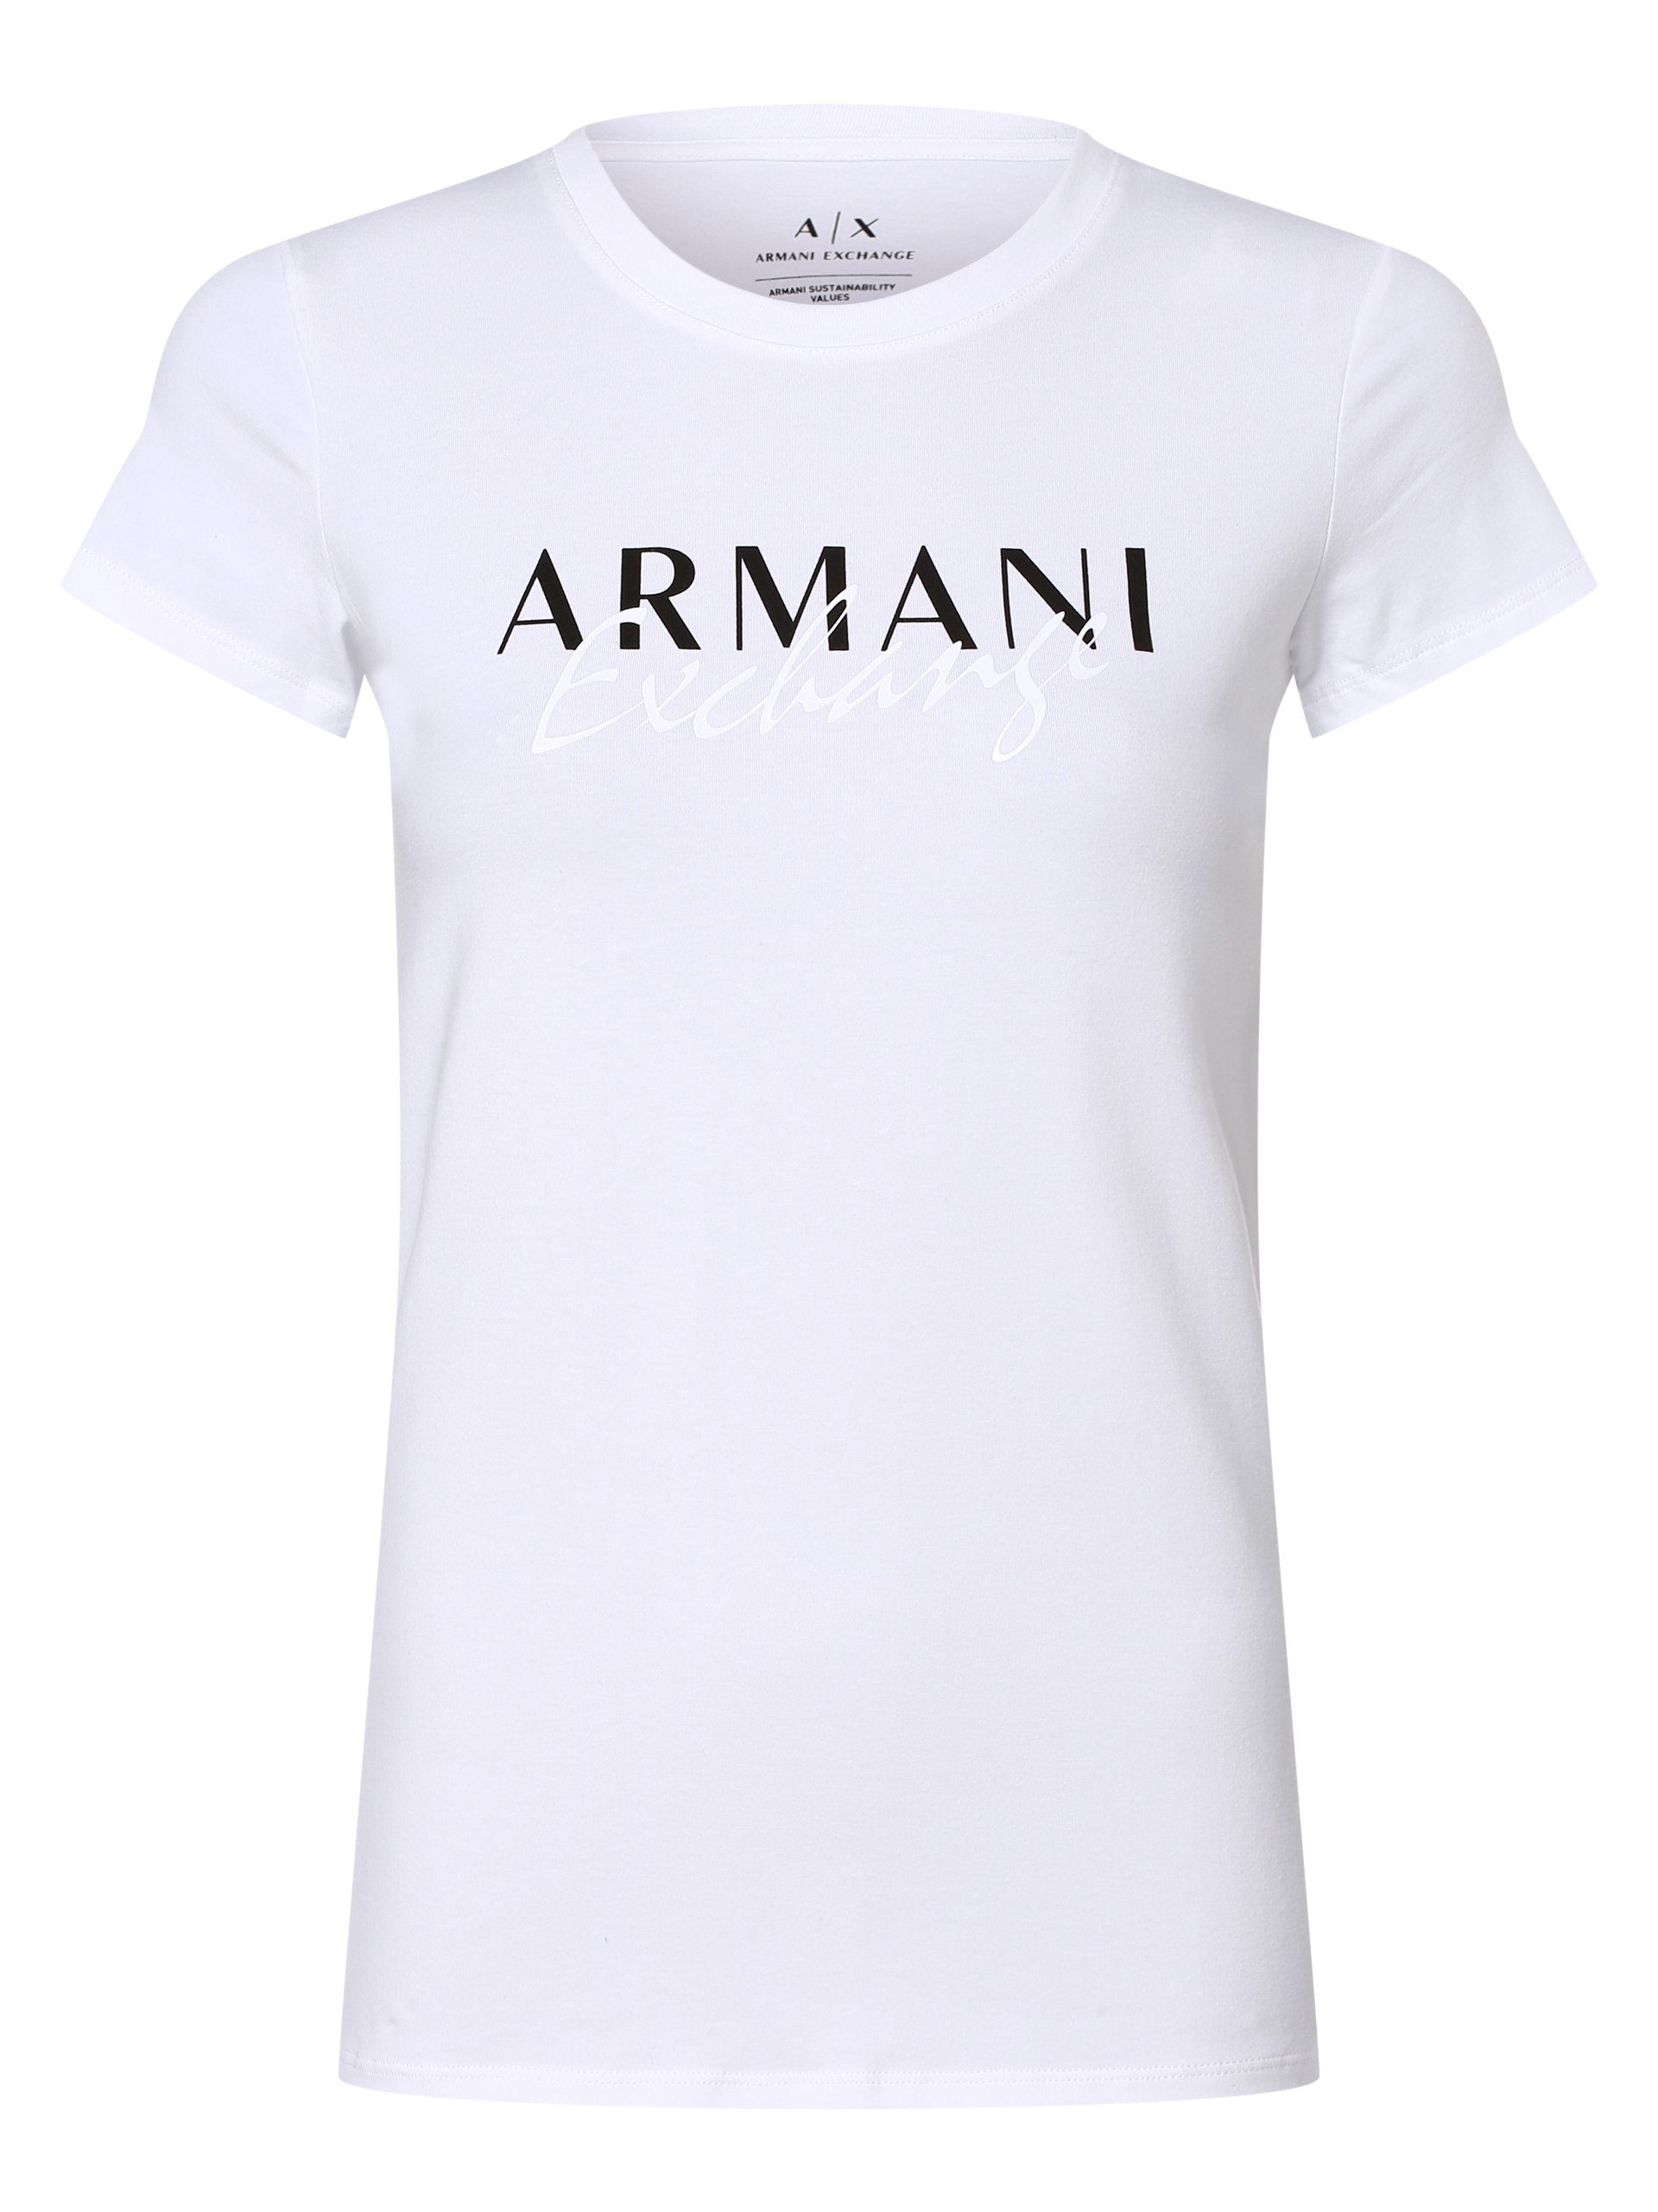 Armani Exchange Connected T-Shirt weiß